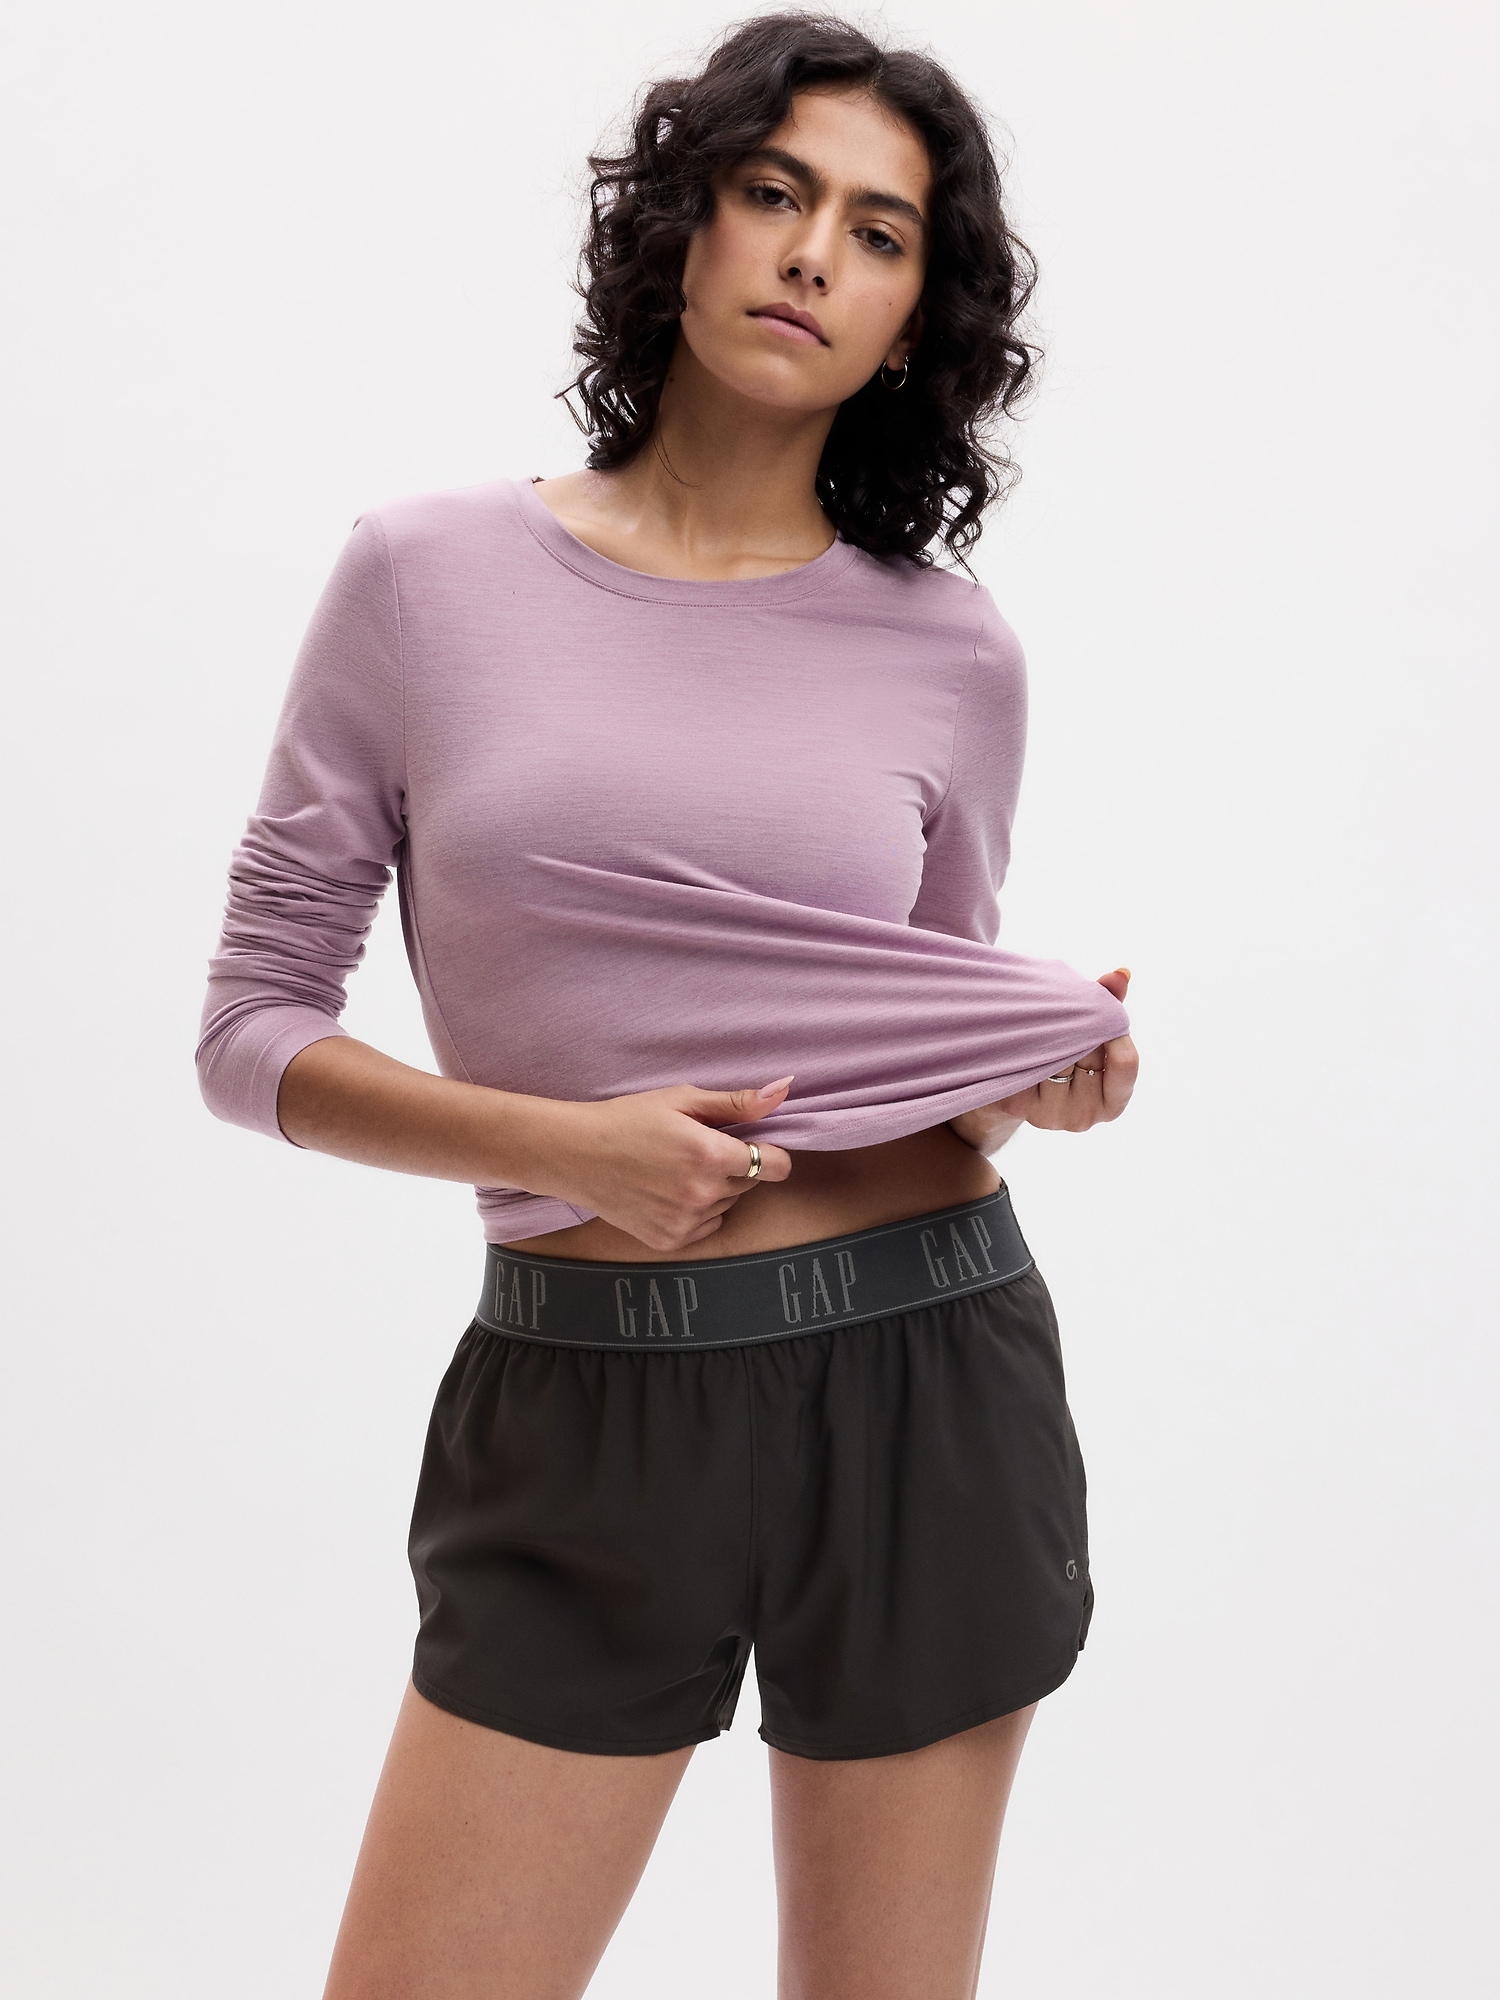 Ruched Yoga Tops